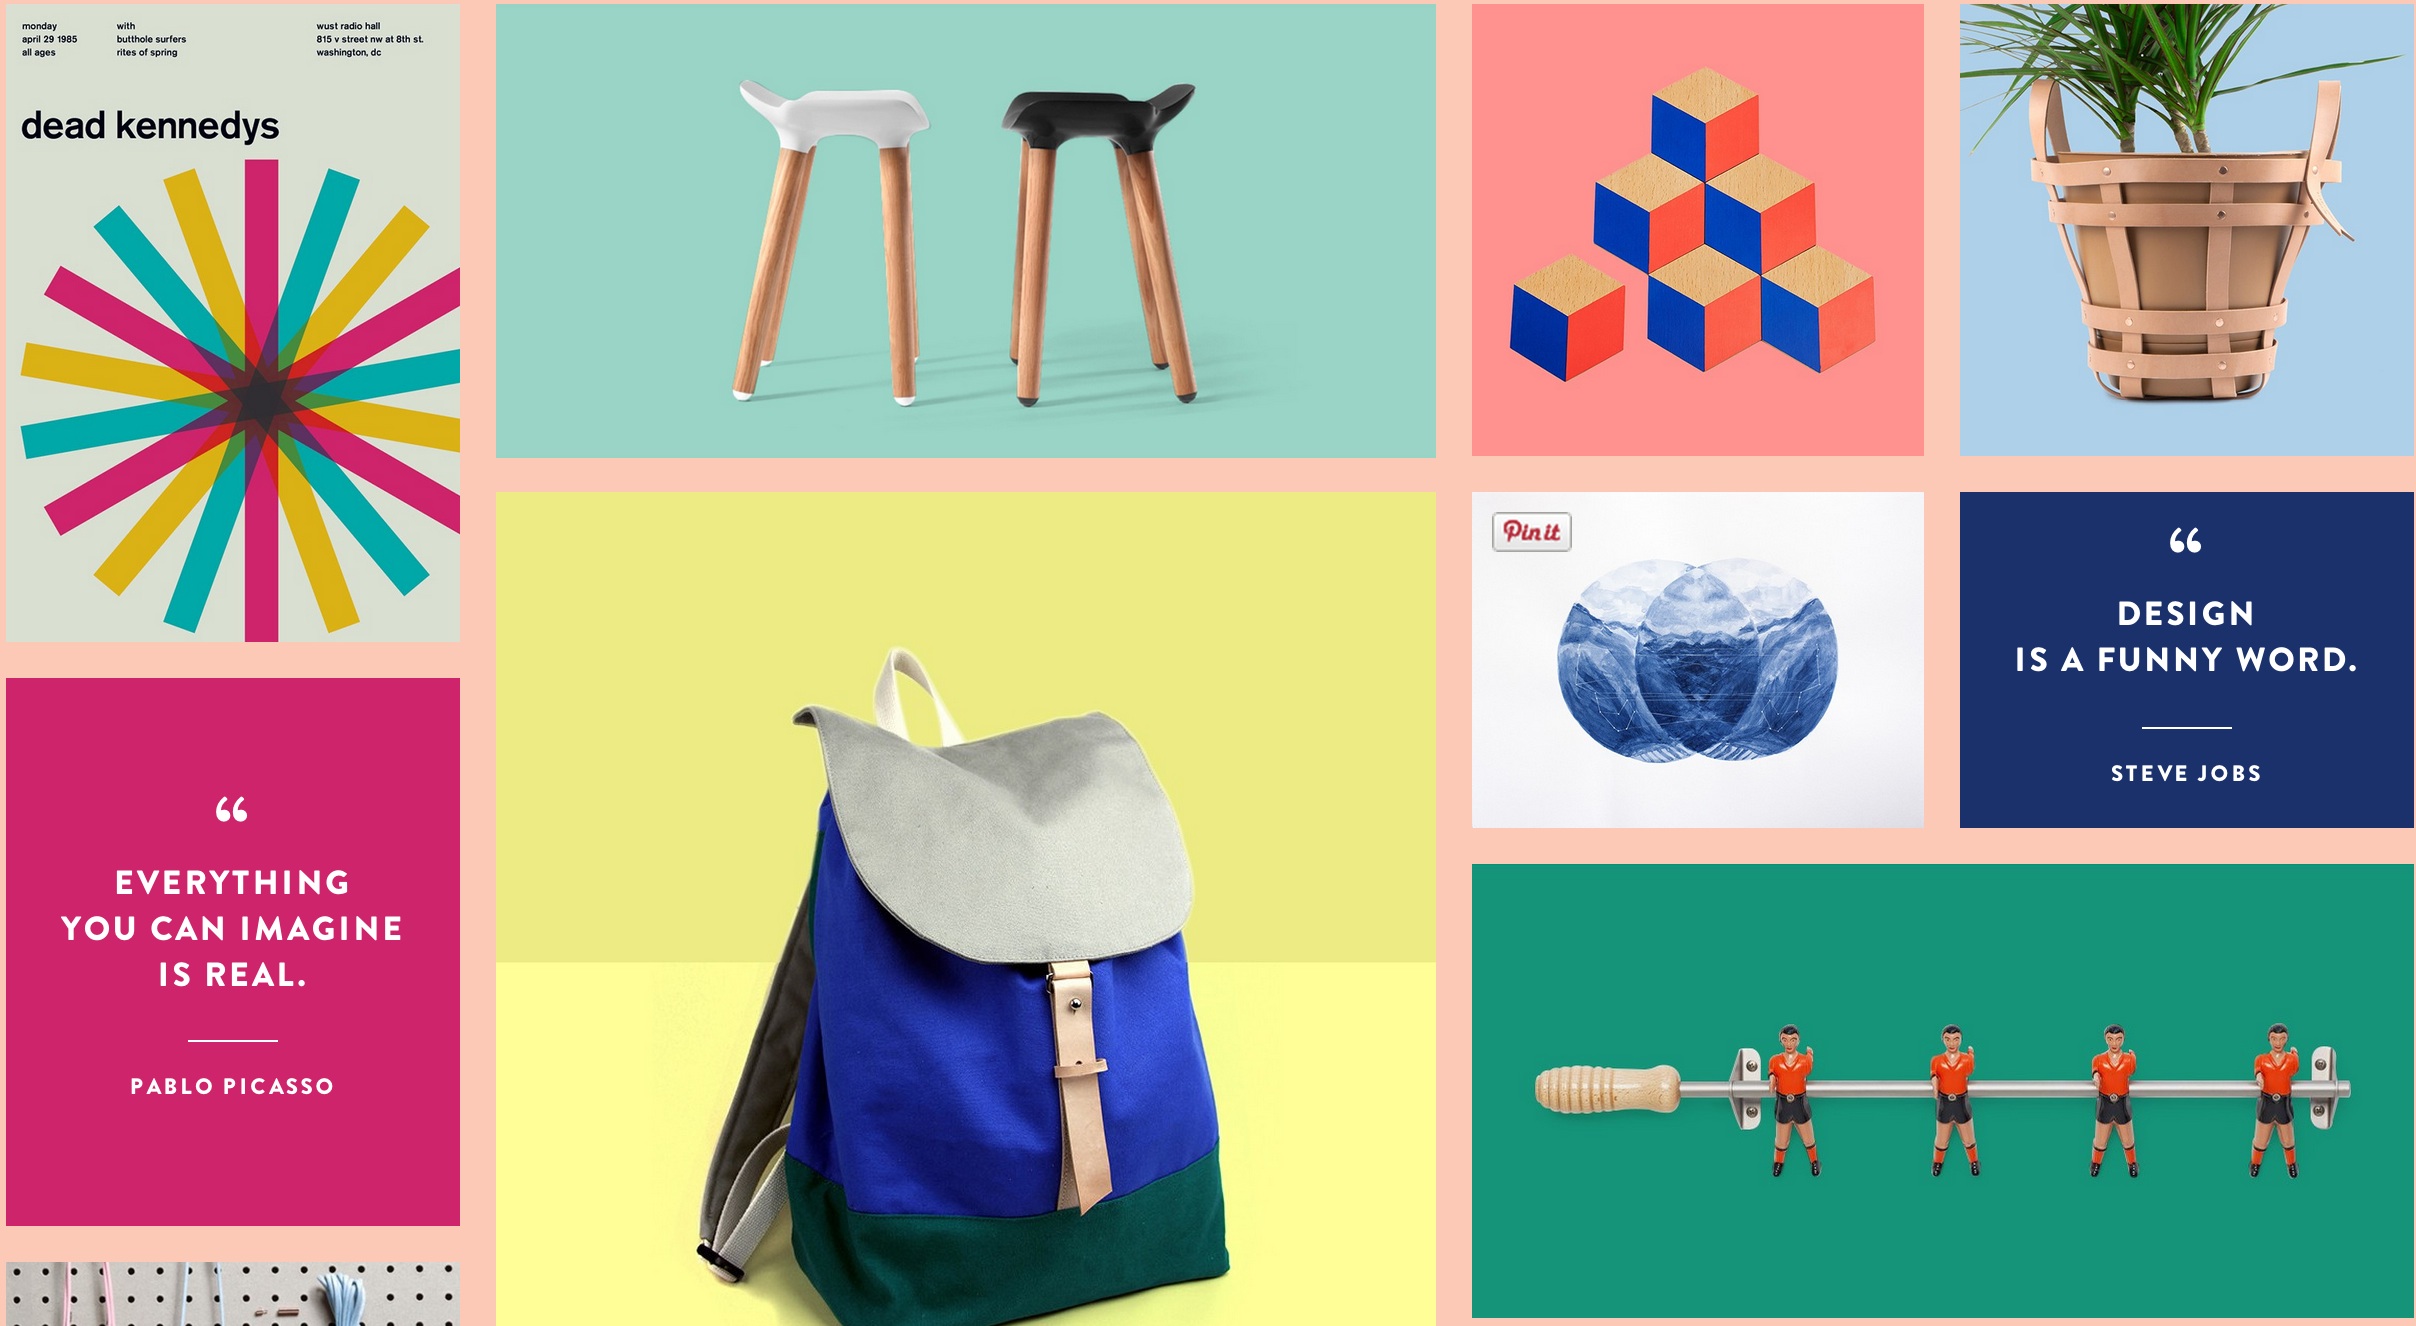 Bezar: The new members-only marketplace for rabid fans of modern design